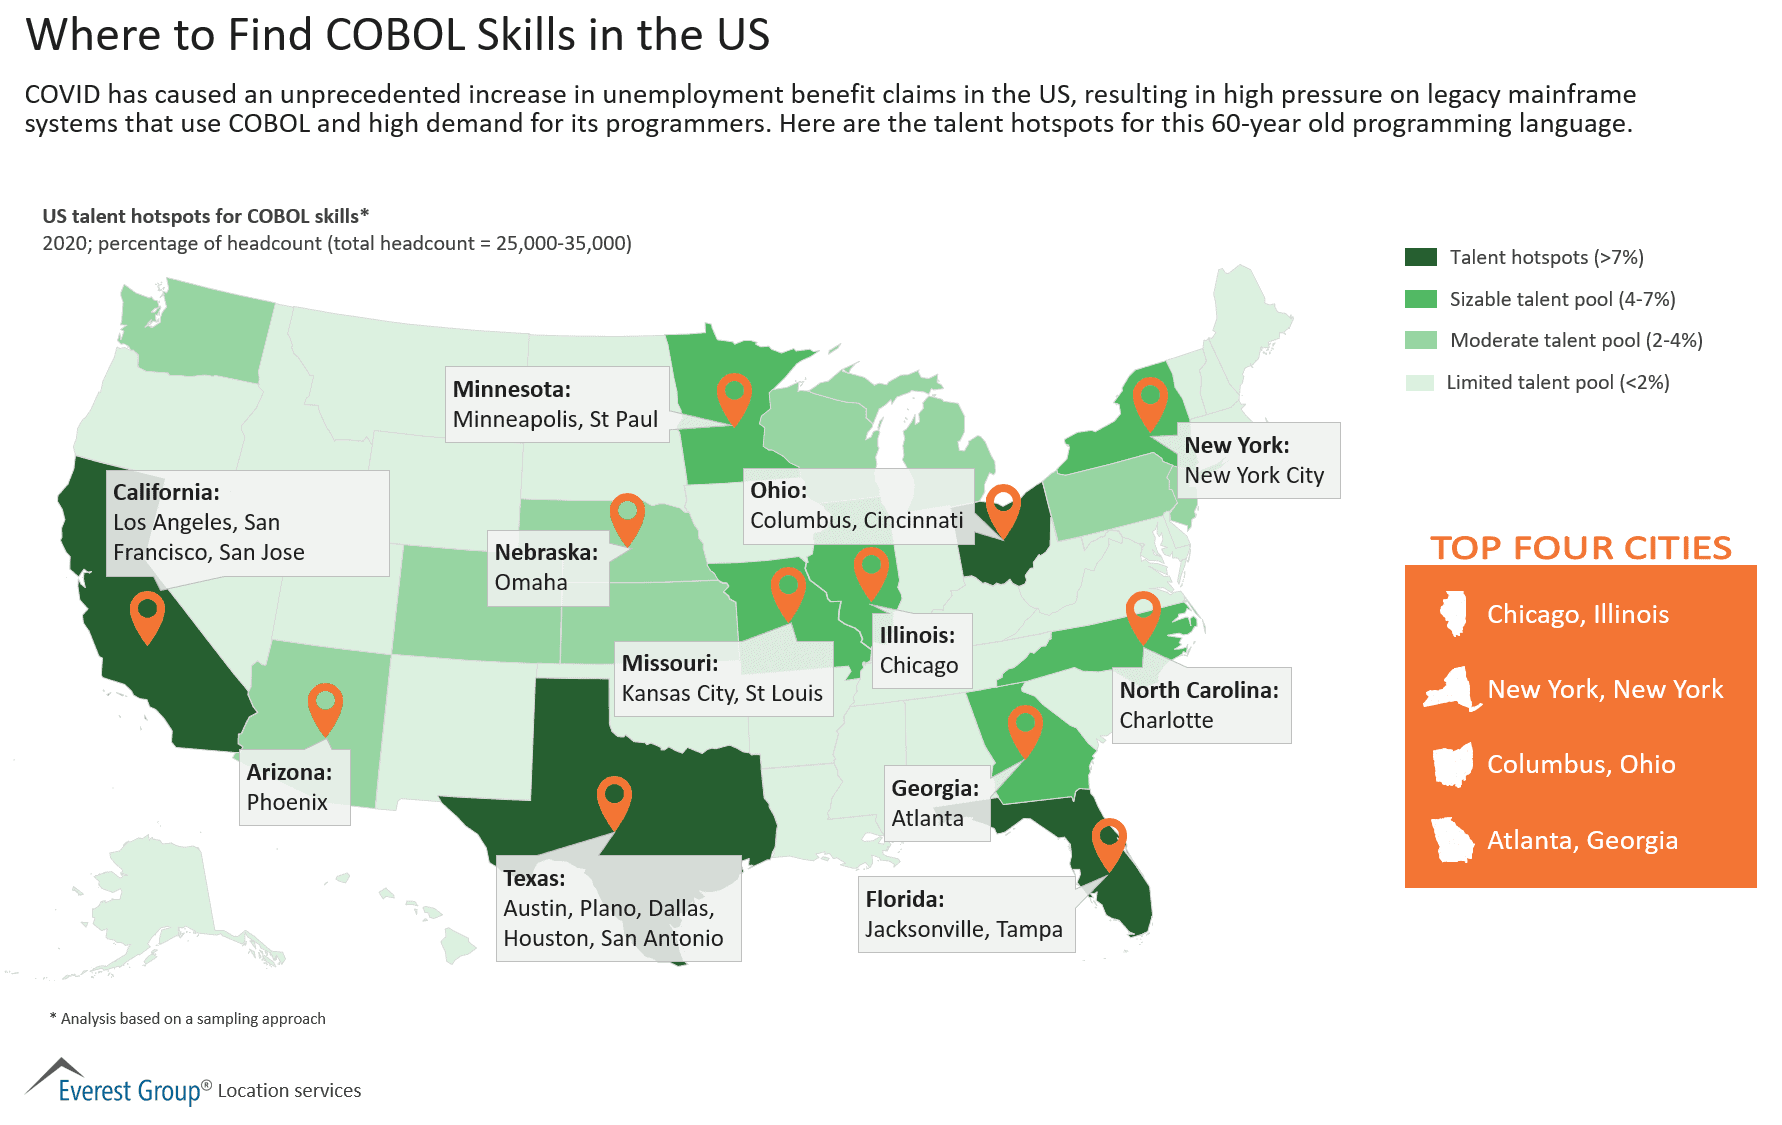 Talent hotspots for COBOL in the US